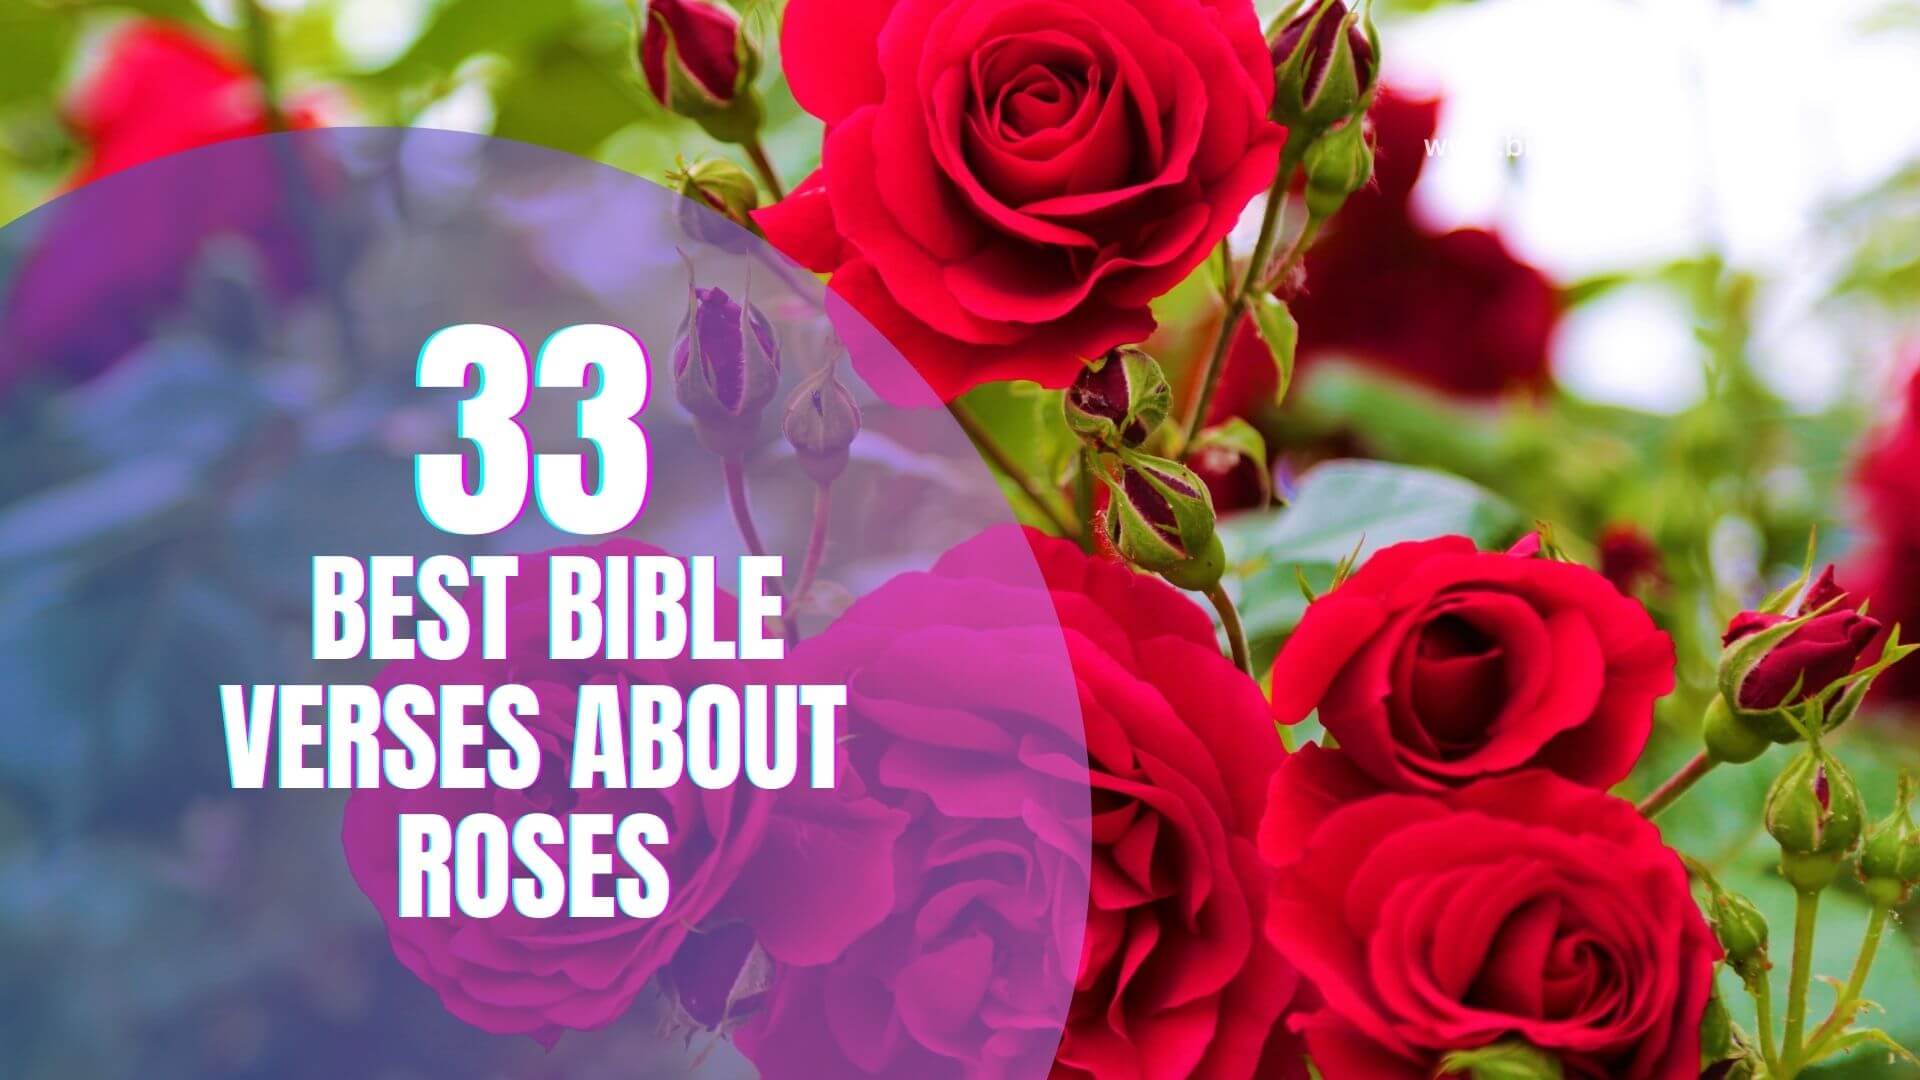 _Best Bible Verses About Roses (1)